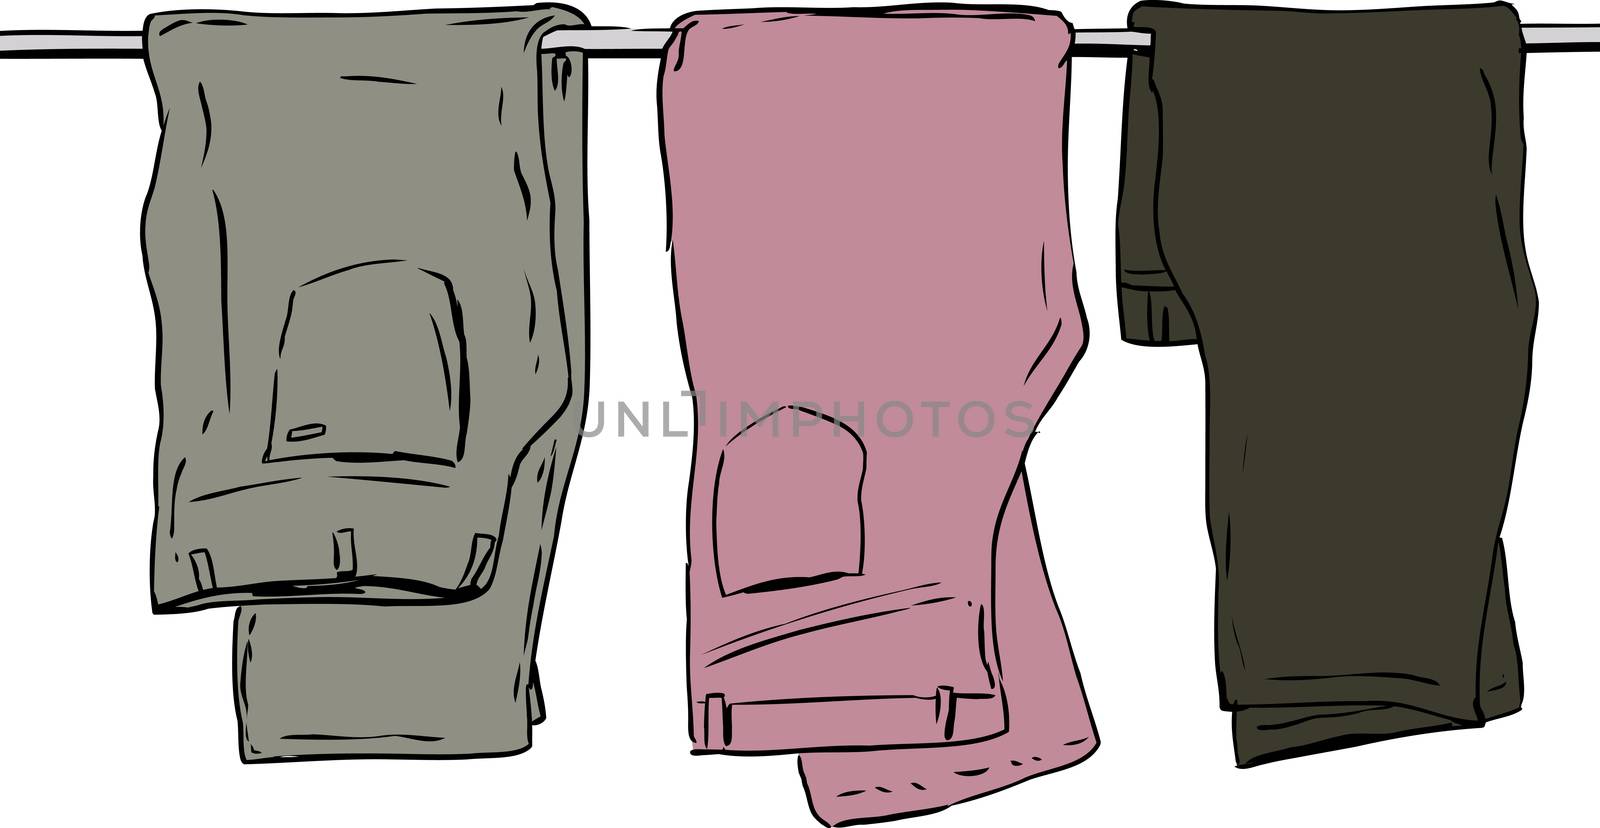 Hand drawn illustration of three pairs of folded jeans and pants over white background